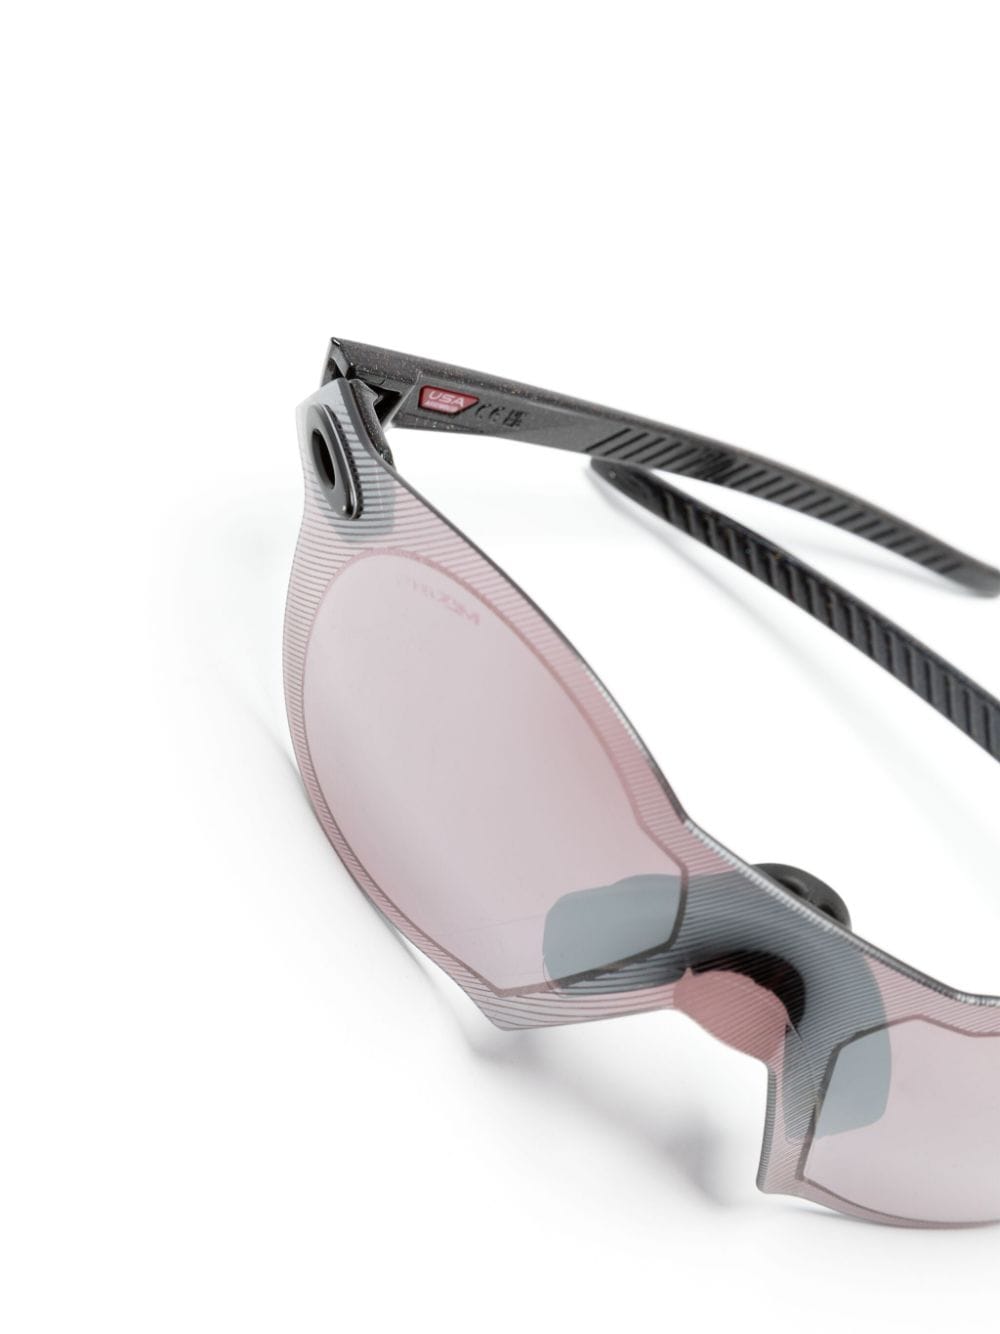 OO9098 round-frame sunglasses<BR/><BR/><BR/>